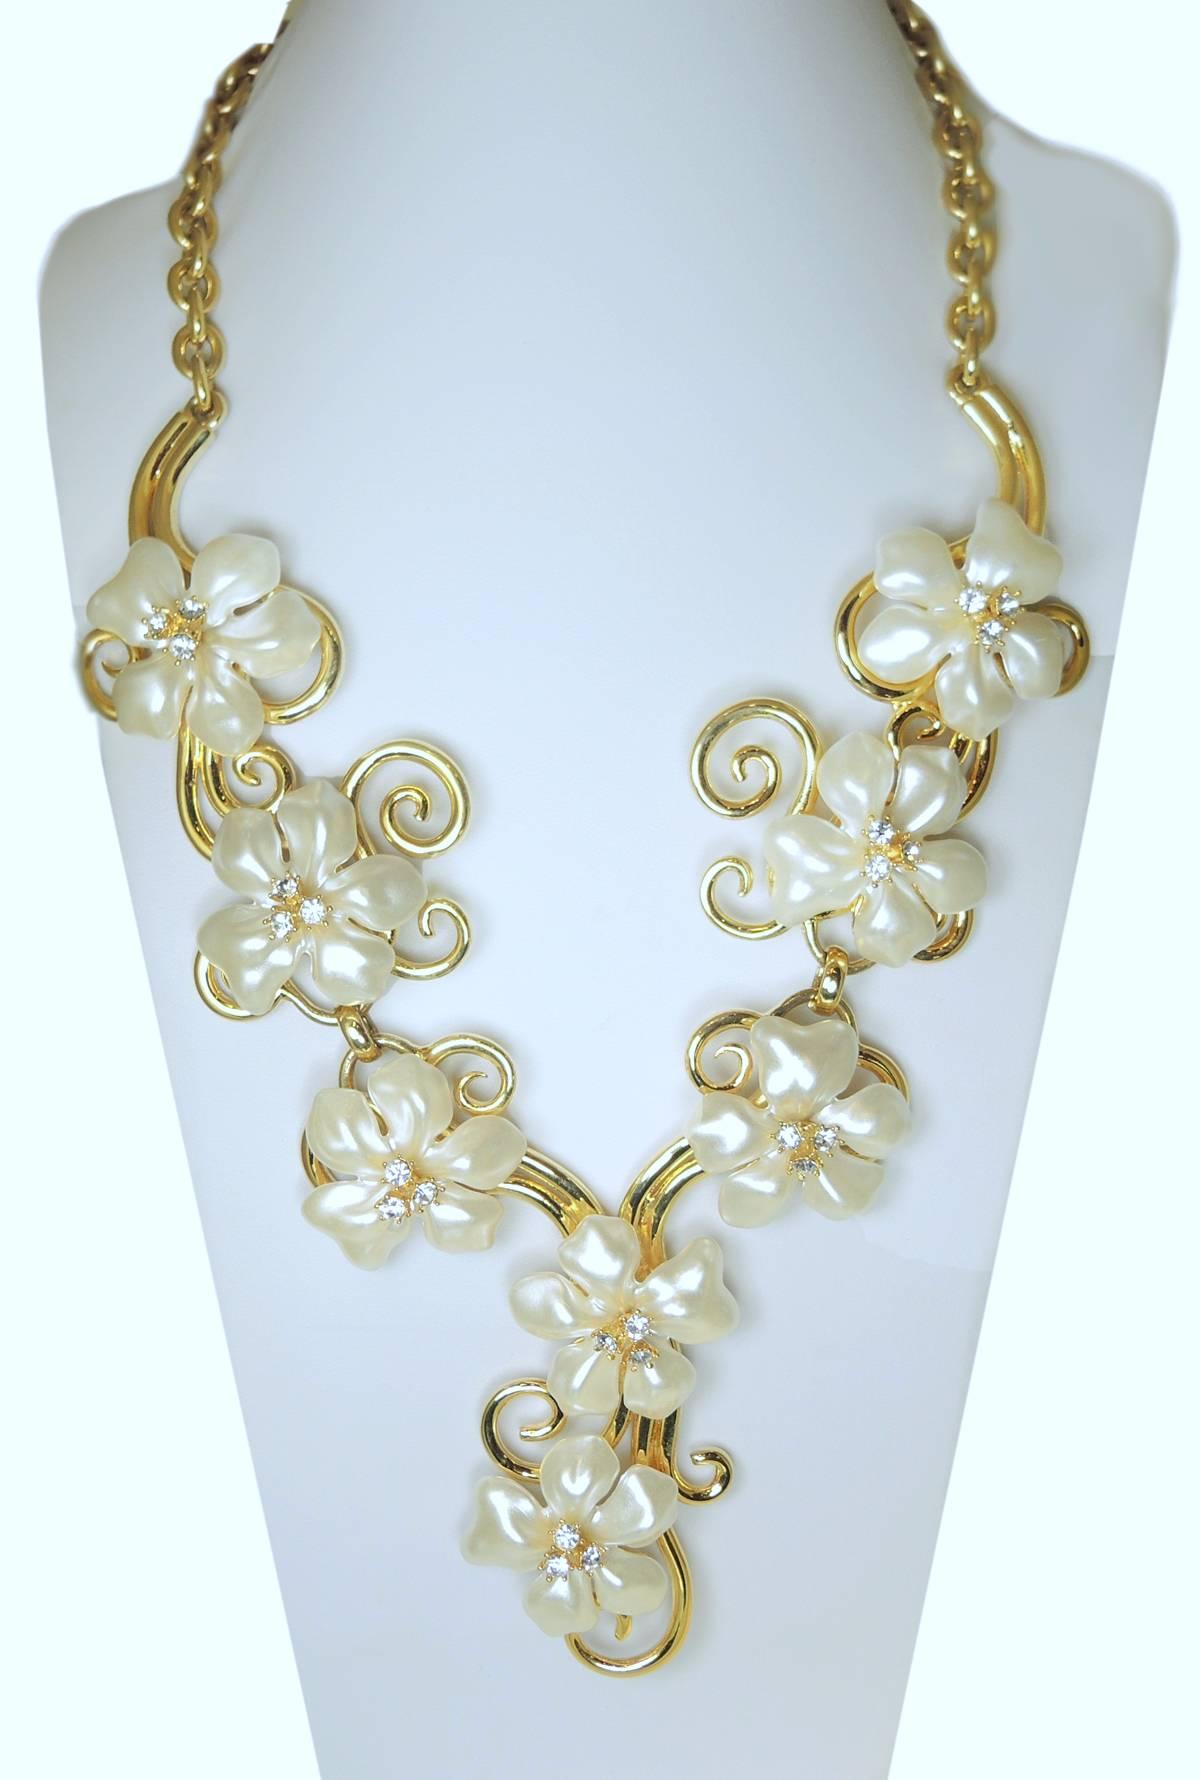 This is a showstopper necklace by Kenneth Jay Lane with faux pearls with crystal accents in a swirling gold-tone setting.  This stunning statement piece measures 14’ x 2” with a lobster clasp. It is signed “Kenneth Lane” “Made In The USA” and is in